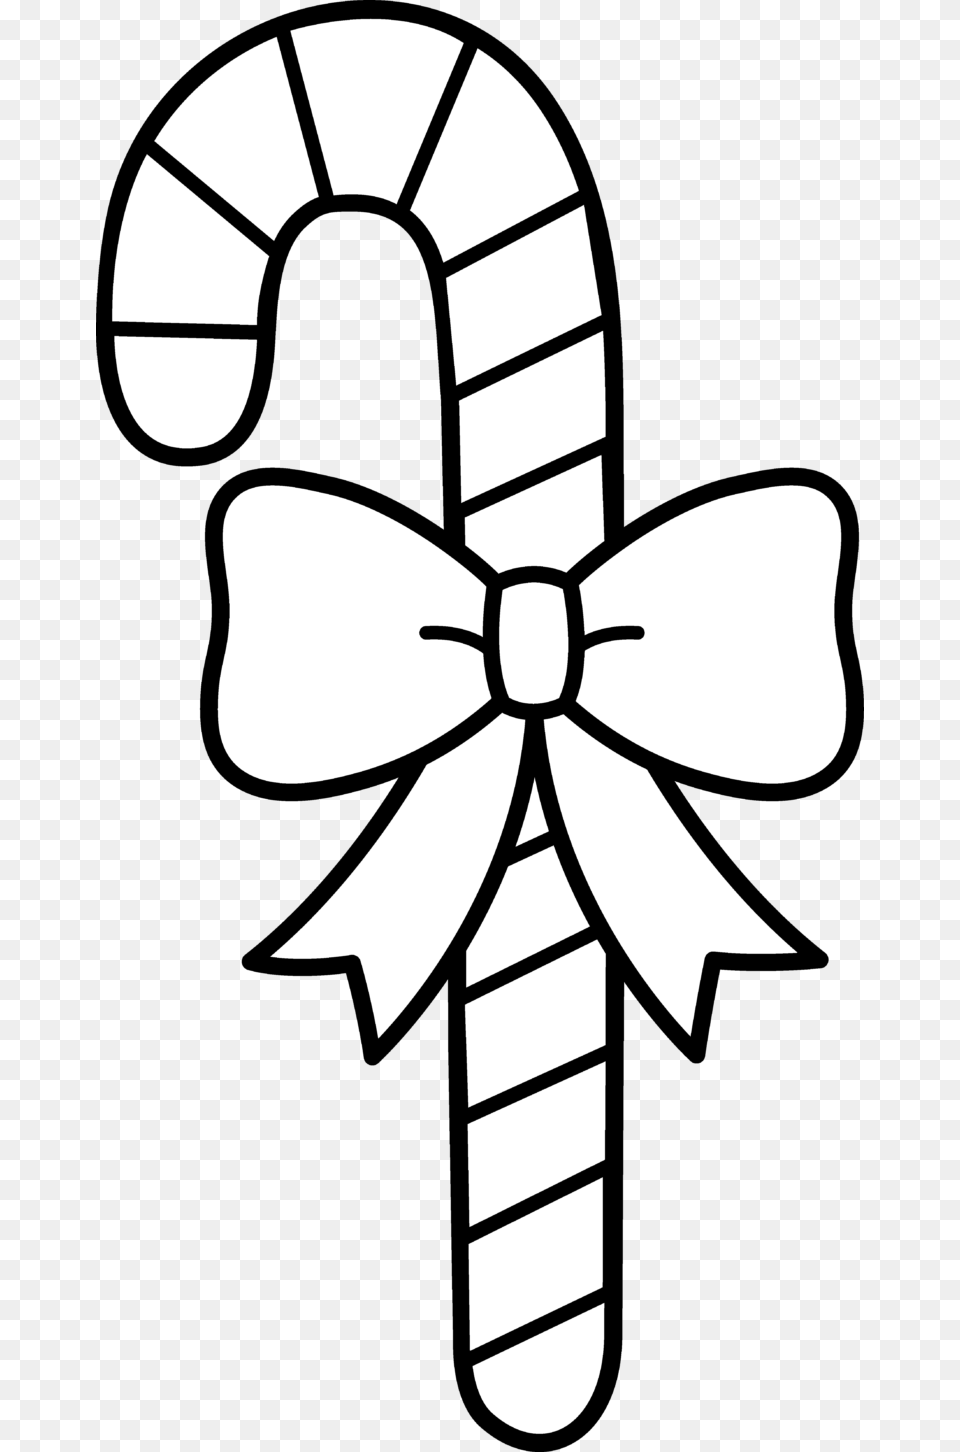 Candy Cane Coloring Page, Accessories, Formal Wear, Tie, Stencil Png